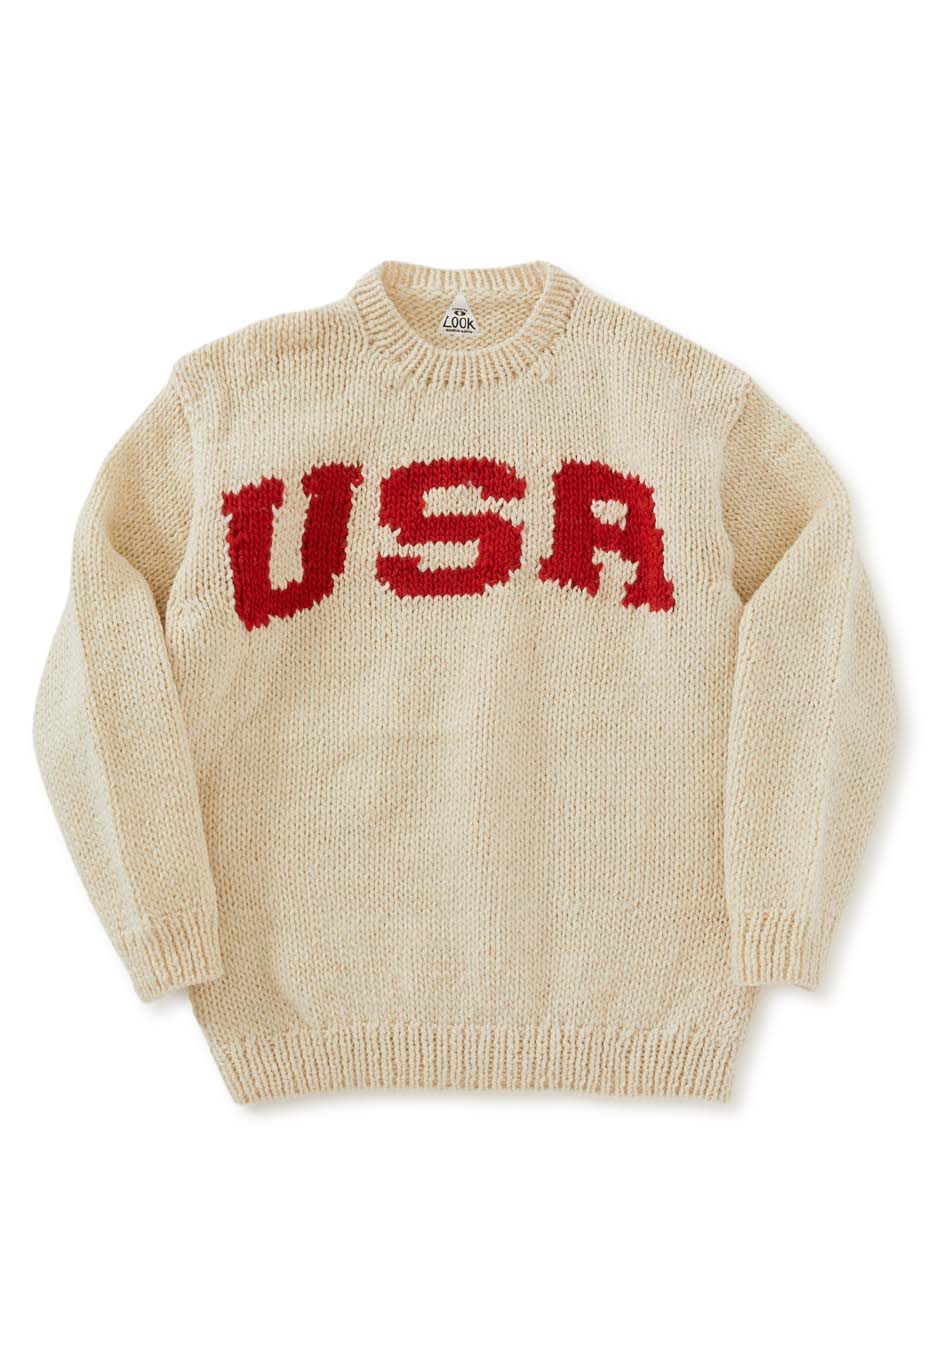 THRIFTY LOOK USA hand knit crew neck